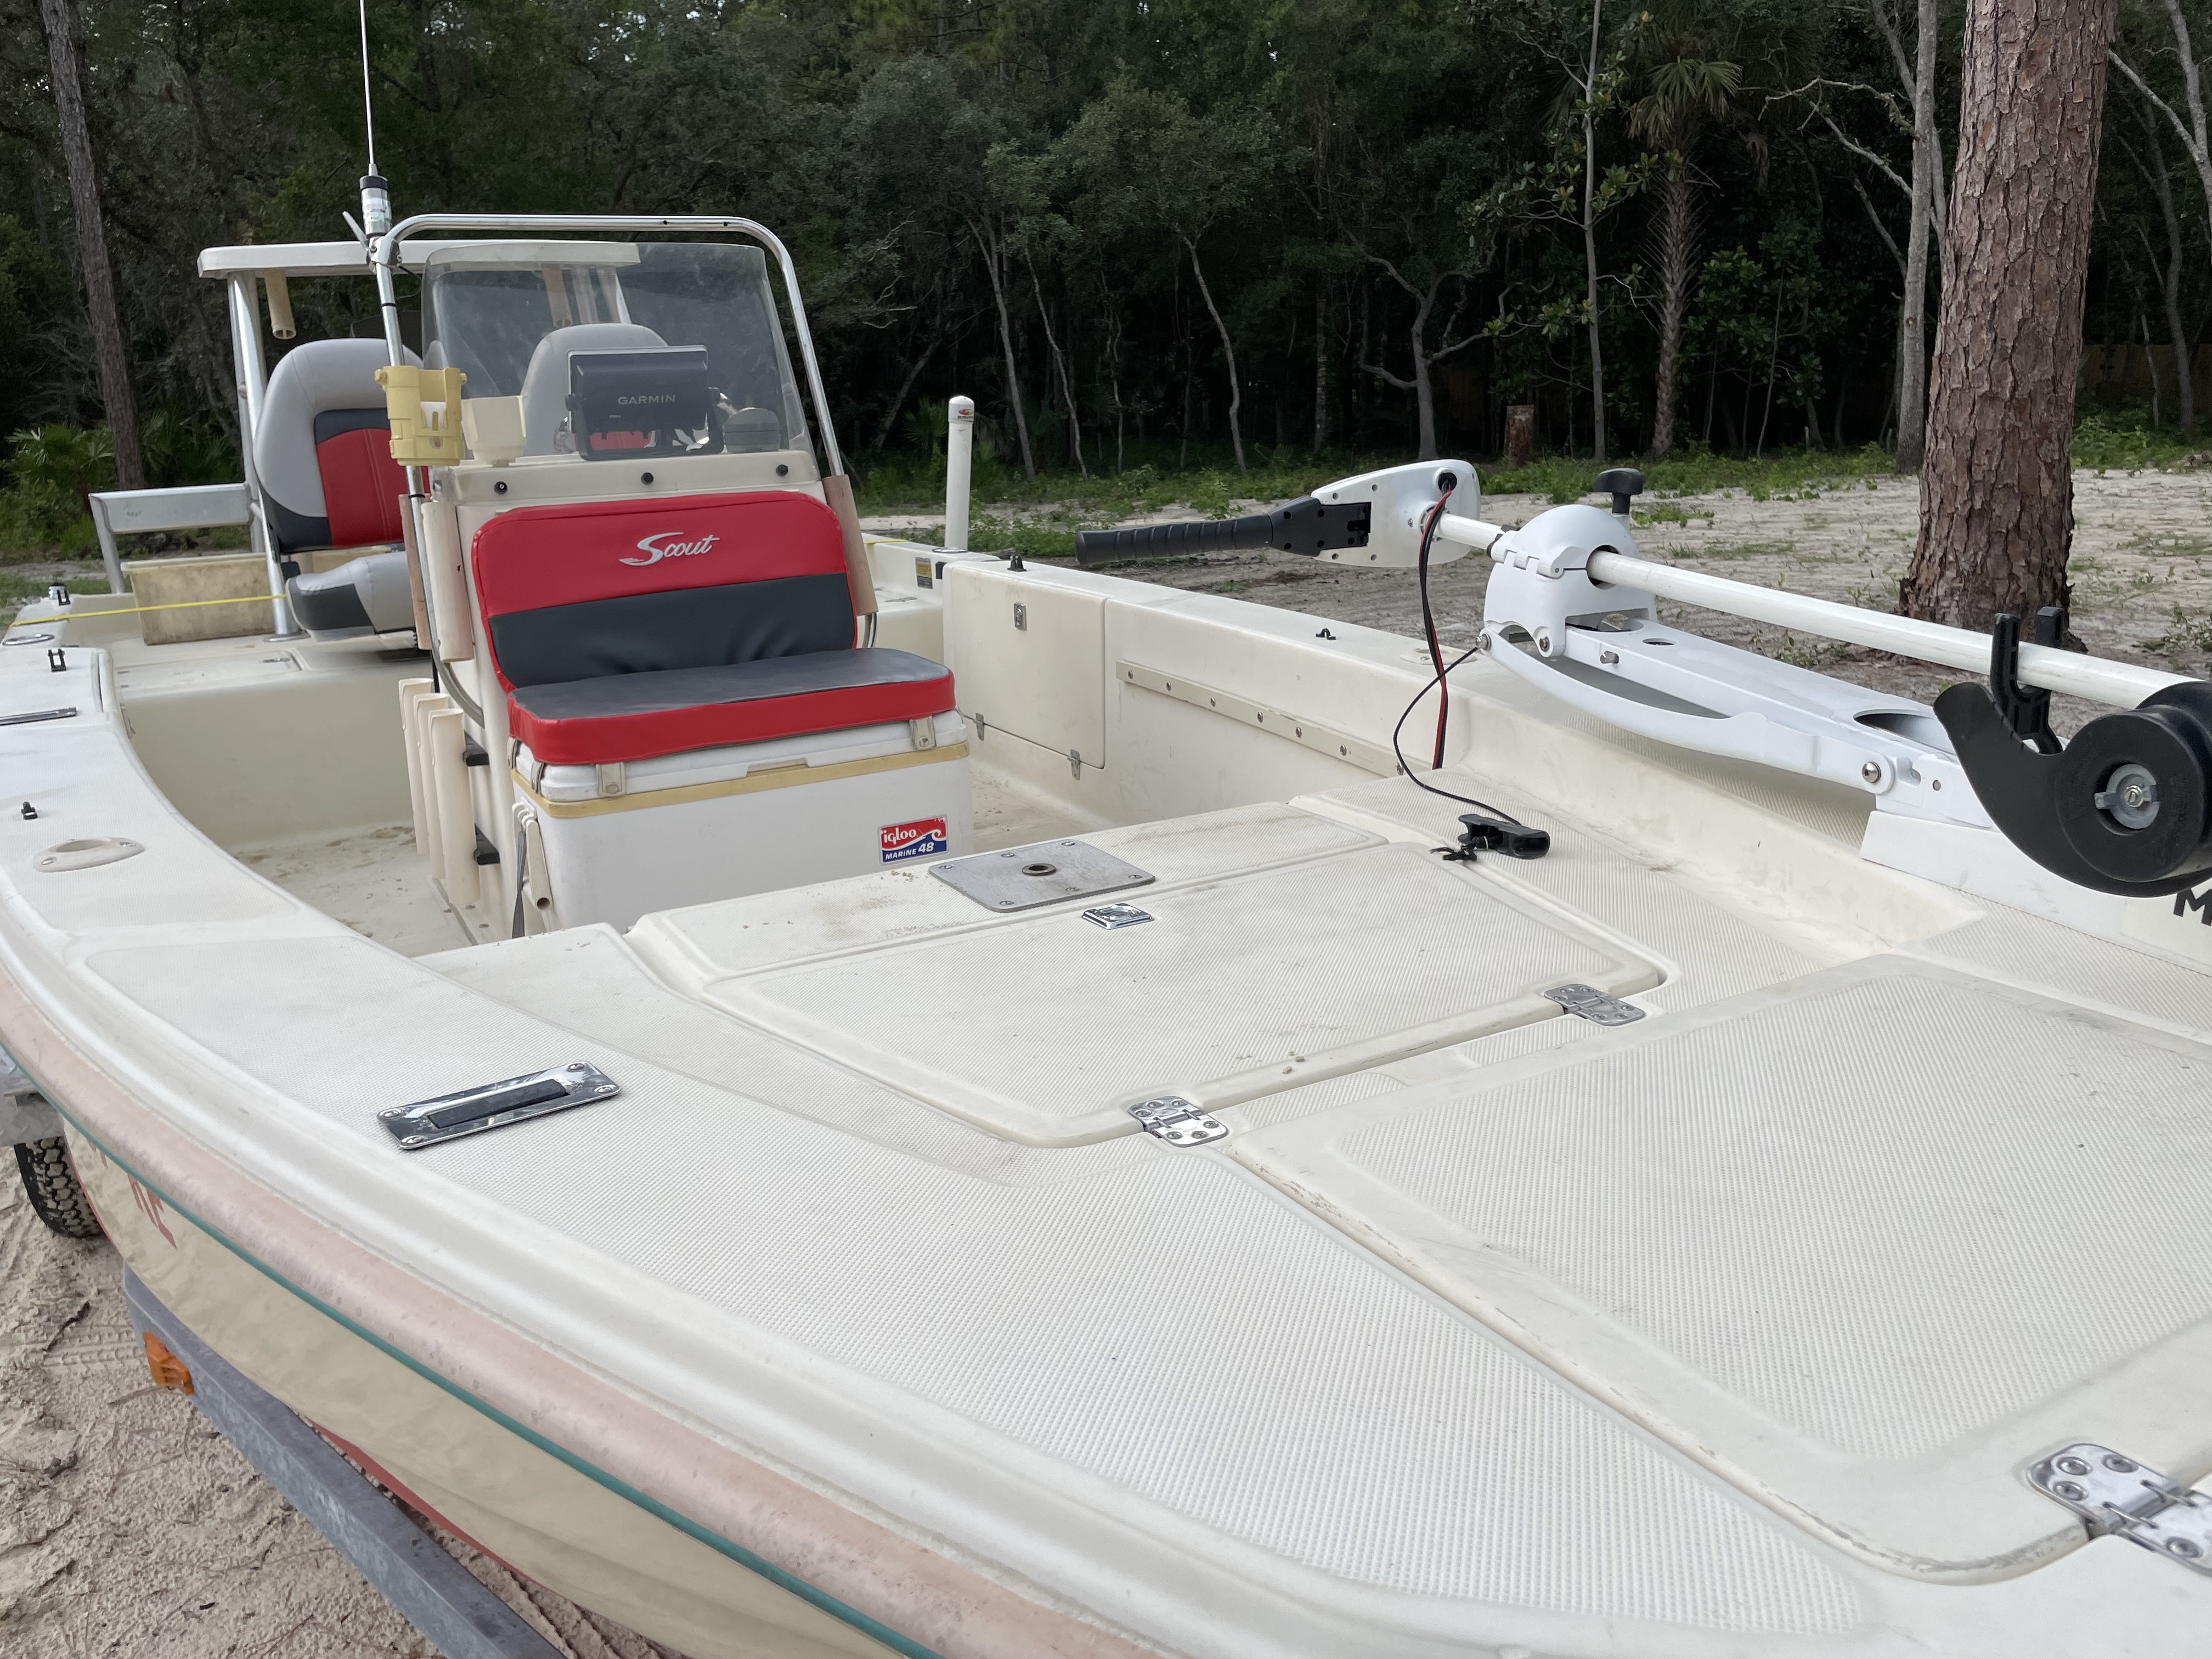 1999 Scout Scout  16.2sf C-90 P Power boat for sale in Homosassa, FL - image 9 